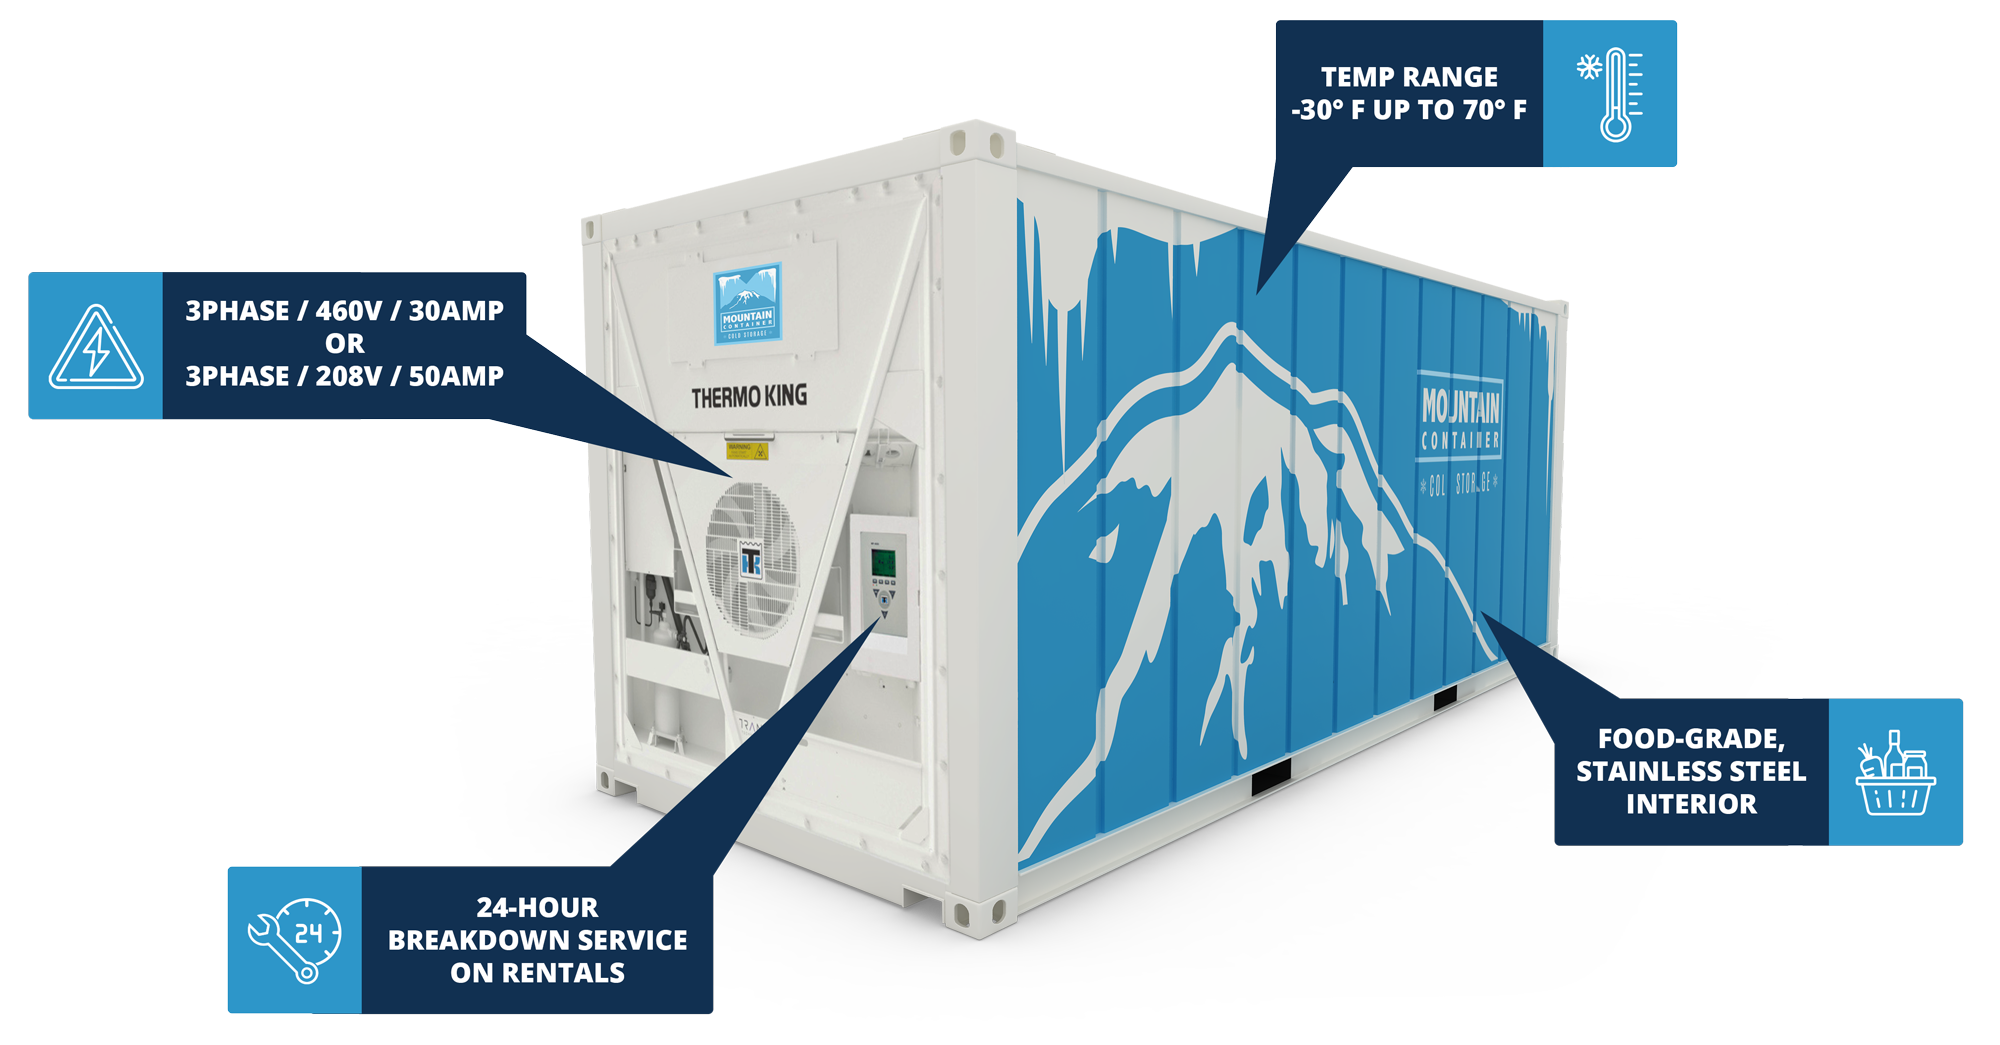 Mountain Container Cold Storage Shipping Container Infographic stating that: Temperature range -30° F up to 70°F, food-grade stainless steel interior, 3phase / 460v / 30 amp or 3phase / 208v / 50 amp and  24 hour breakdown service on all rentals. 